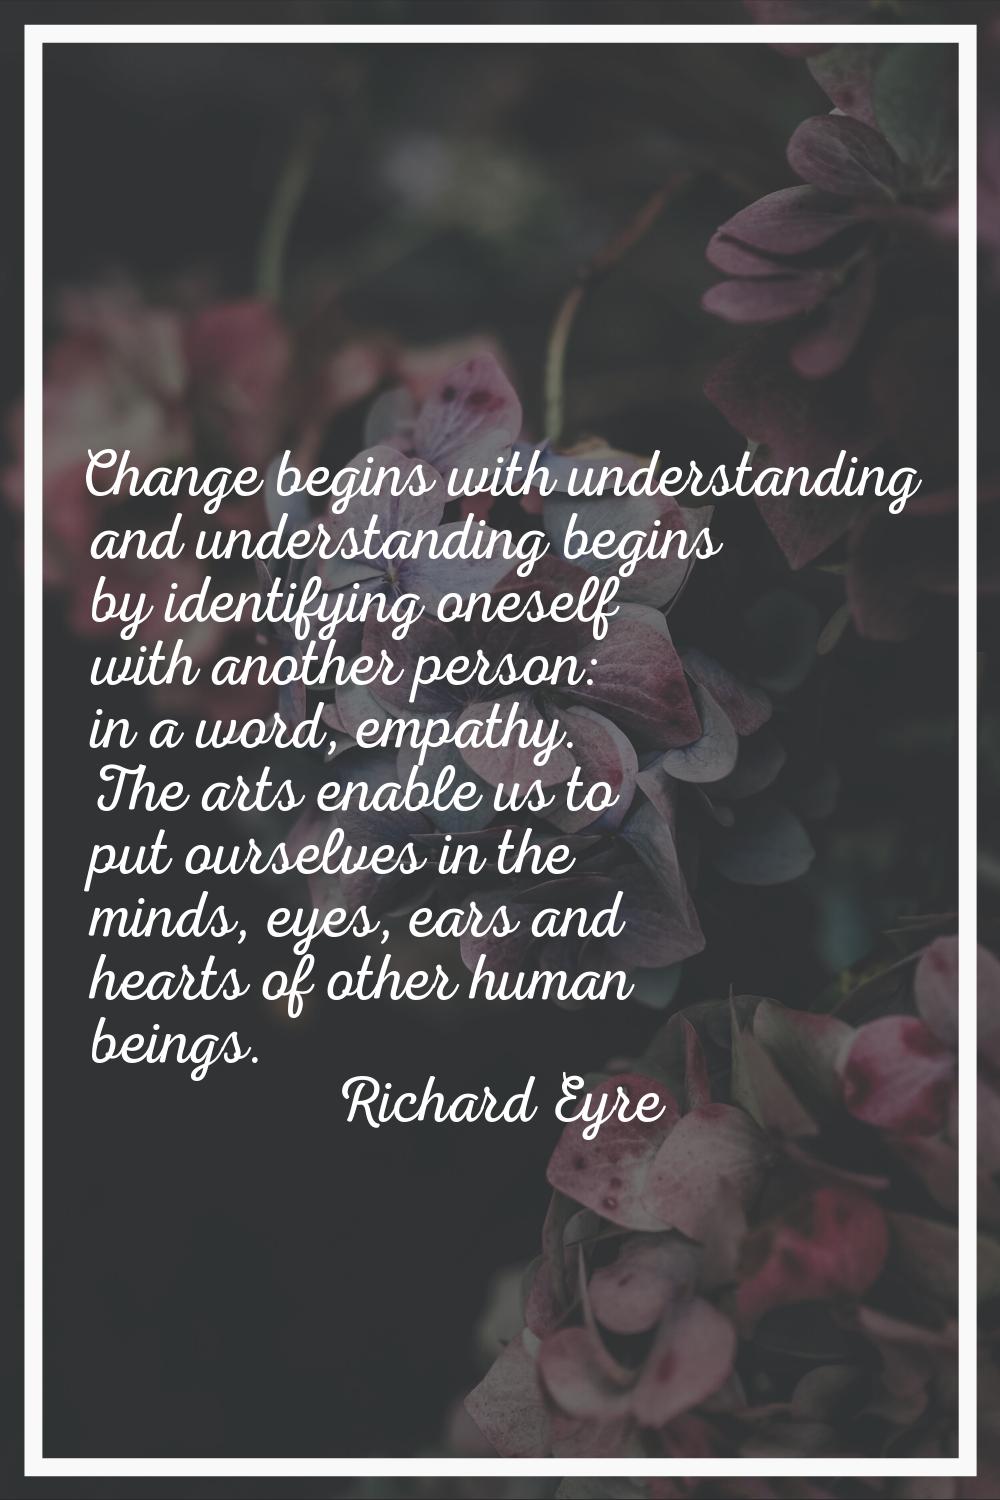 Change begins with understanding and understanding begins by identifying oneself with another perso